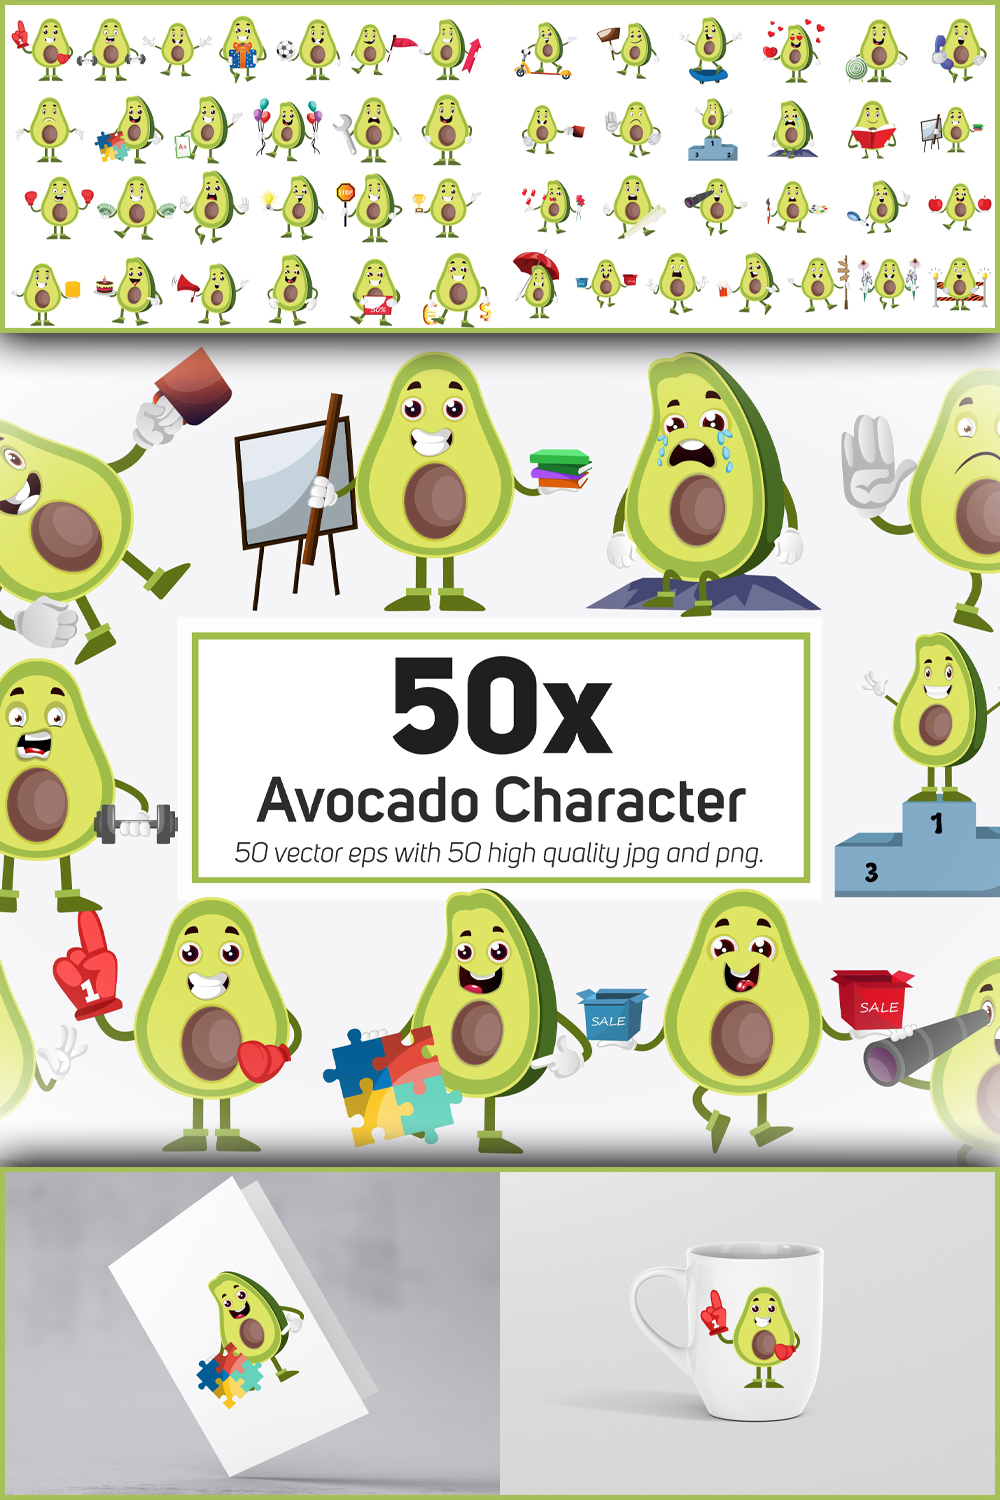 542789 50x avocado character and mascot collection illust pinterest 1000 1500 563